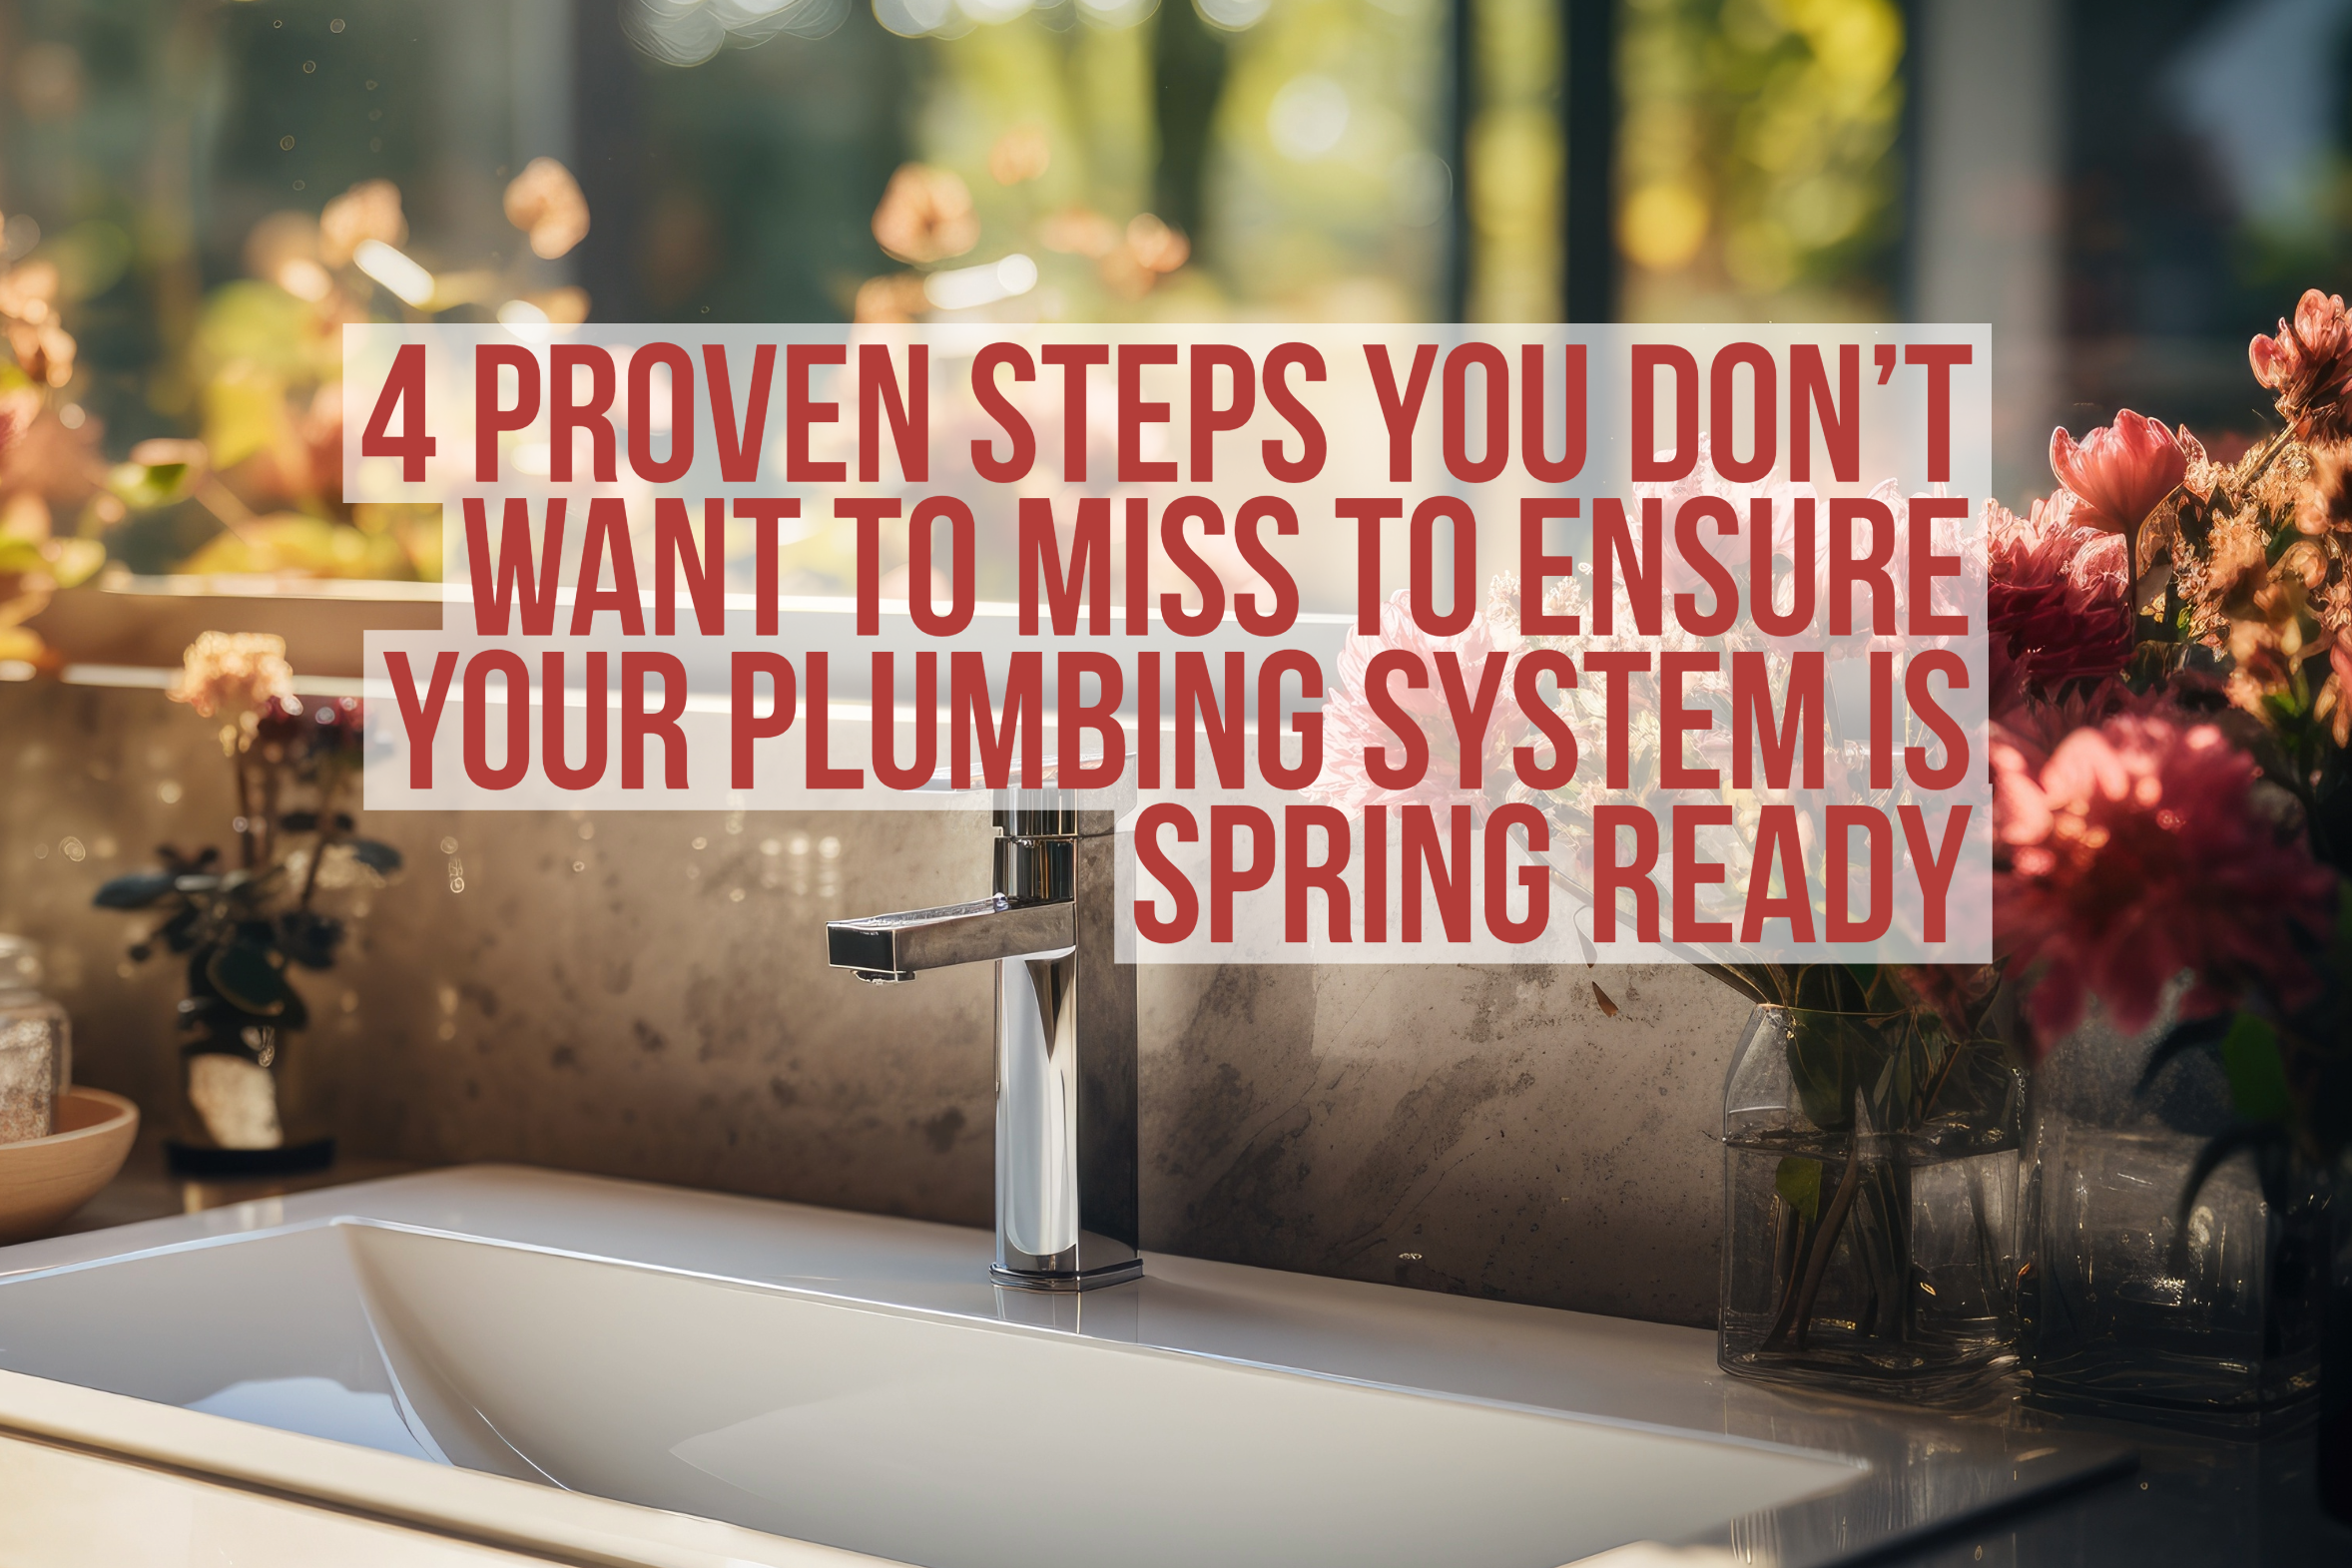 Spring plumbing steps to follow so you can ensure your plumbing system is spring-ready!